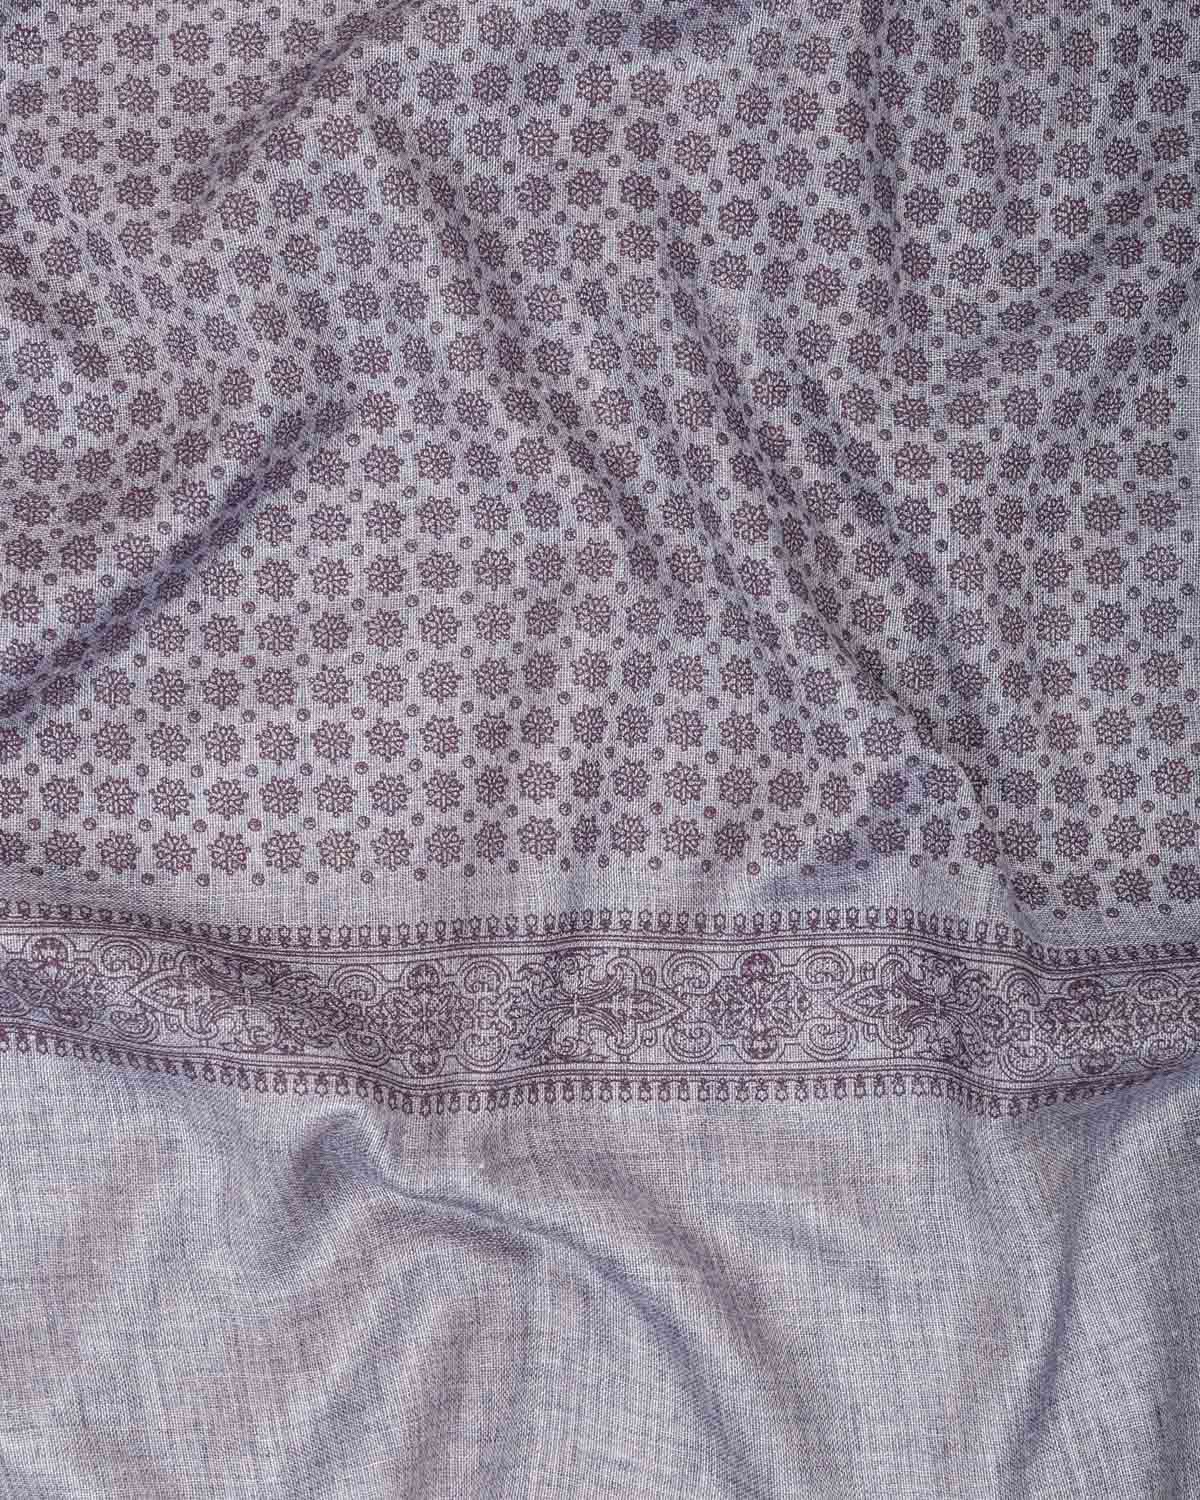 Hand-printed Wool and Modal Scarf in Topaz Purple color